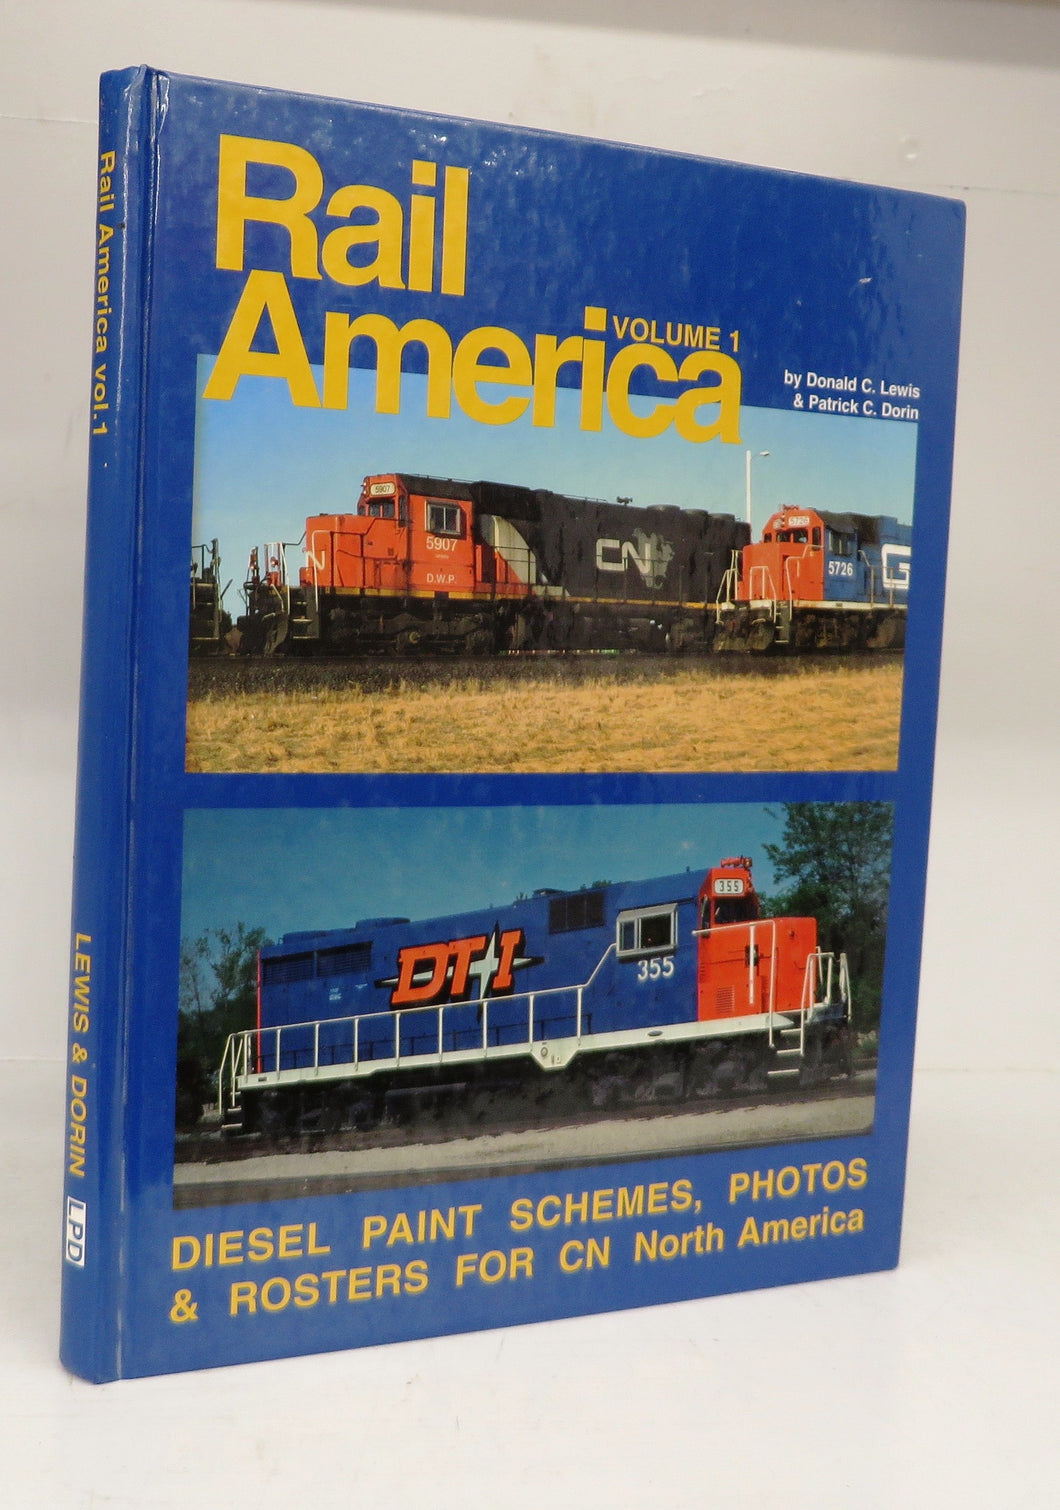 Rail America Vol. I: Diesel Paint Schemes, Photos & Rosters for CN North America